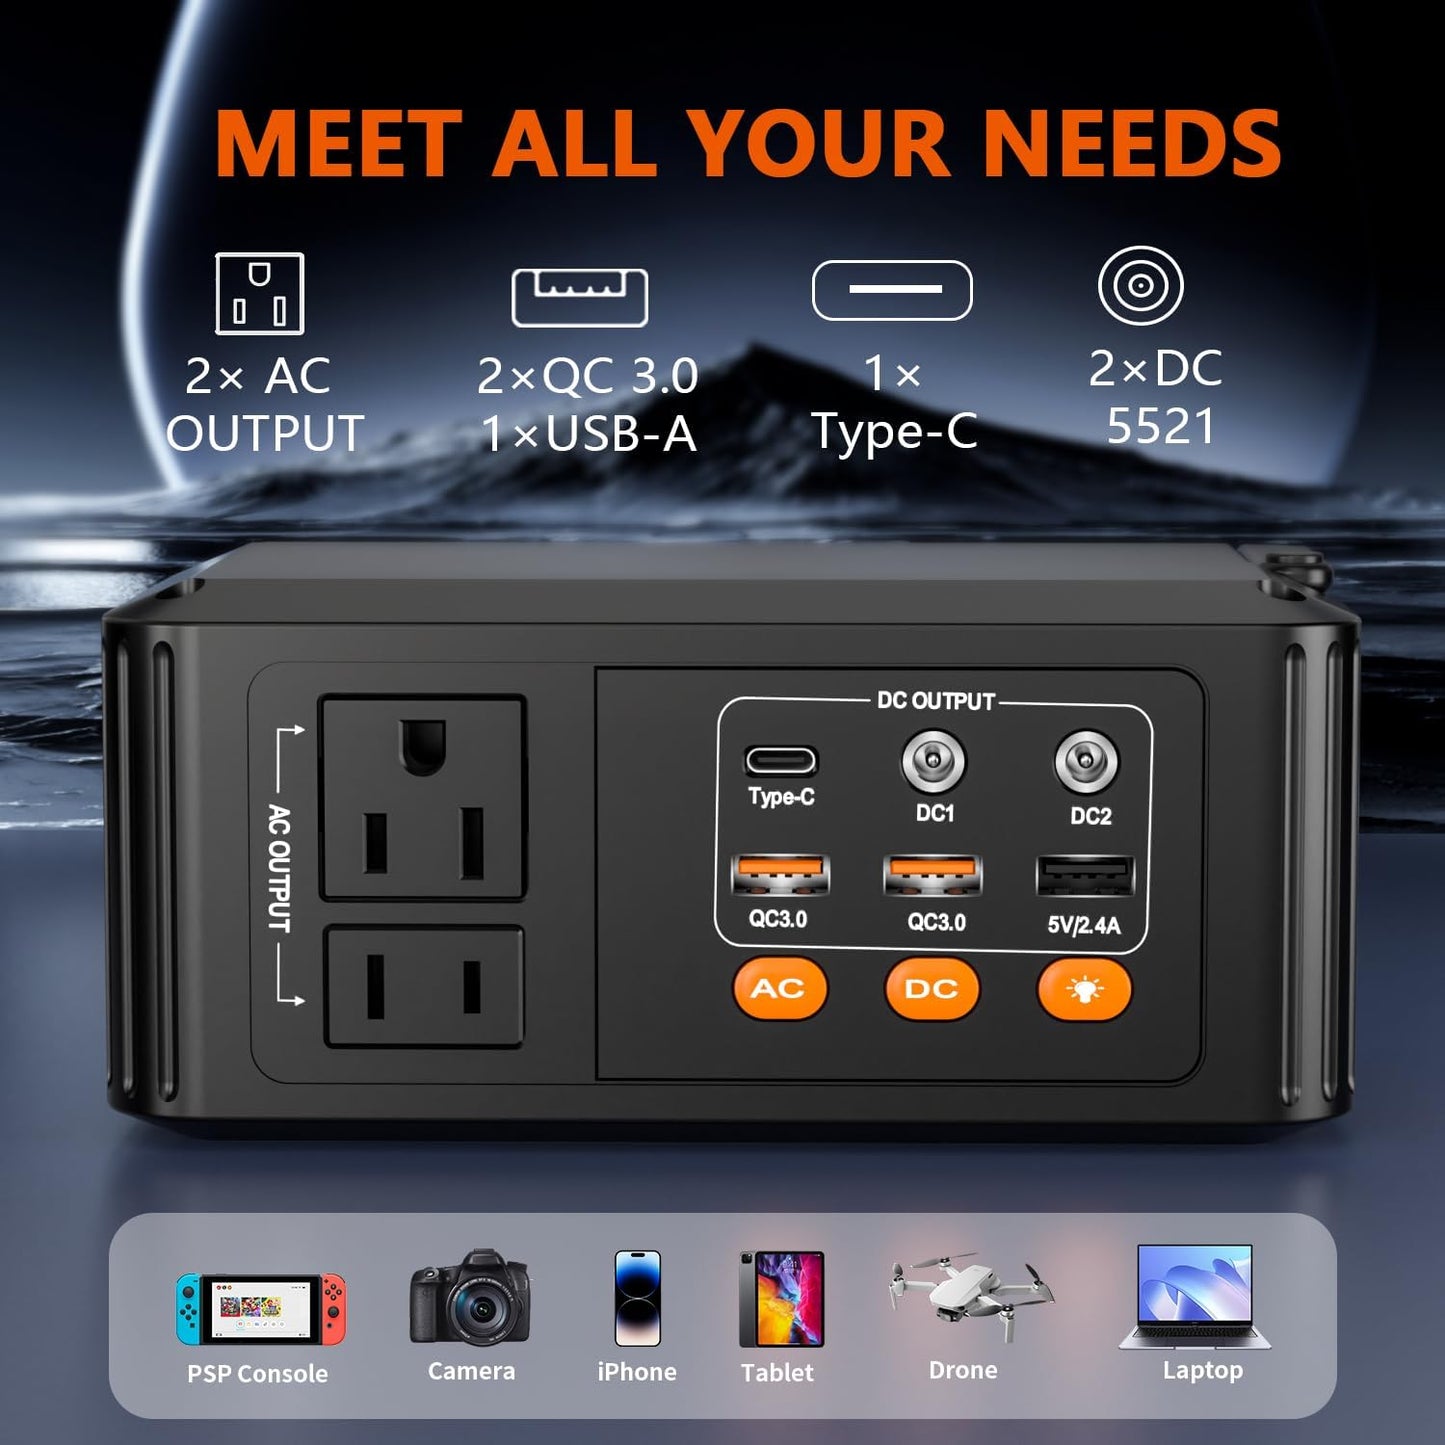 120W Portable Power Station, 88Wh Solar Generator, Lithium Battery Power with 2 110V AC (Peak 150W) Socket/ 2 DC Ports/3 USB QC3.0/LED Light for Outdoor Camping Trip Hunting Emergency